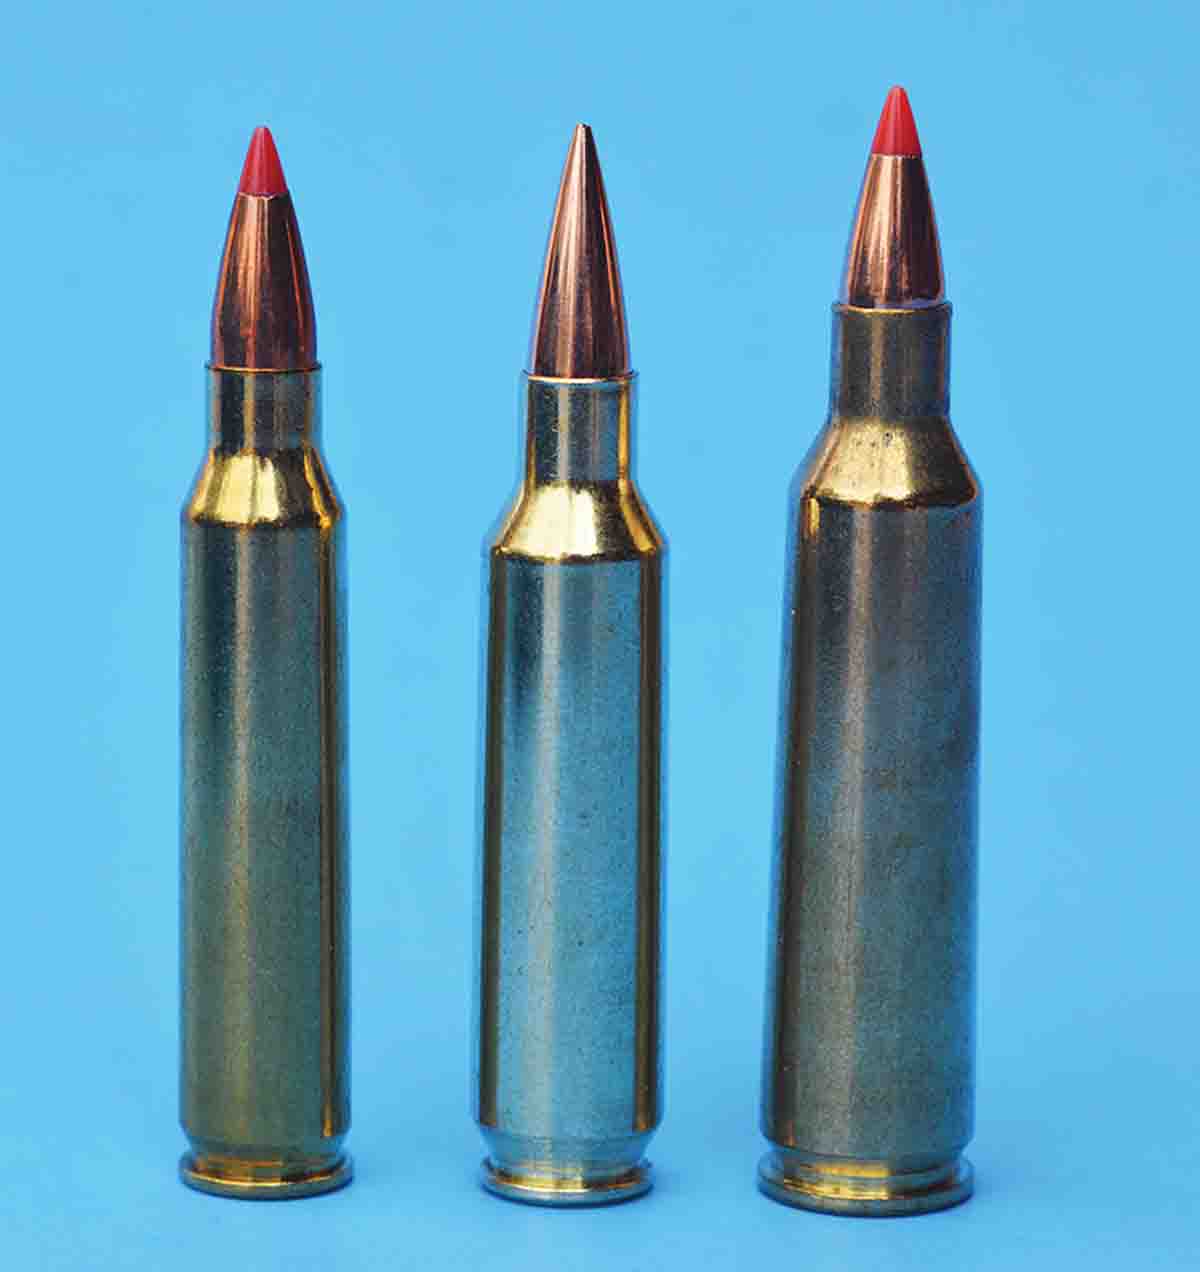 The .22 Nosler fills the performance gap between the .223 and .22-250 Remingtons, and it will stabilize bullets from 40 to 85 grains. From left, .223 Remington, .22 Nosler and .22-250 Remington.